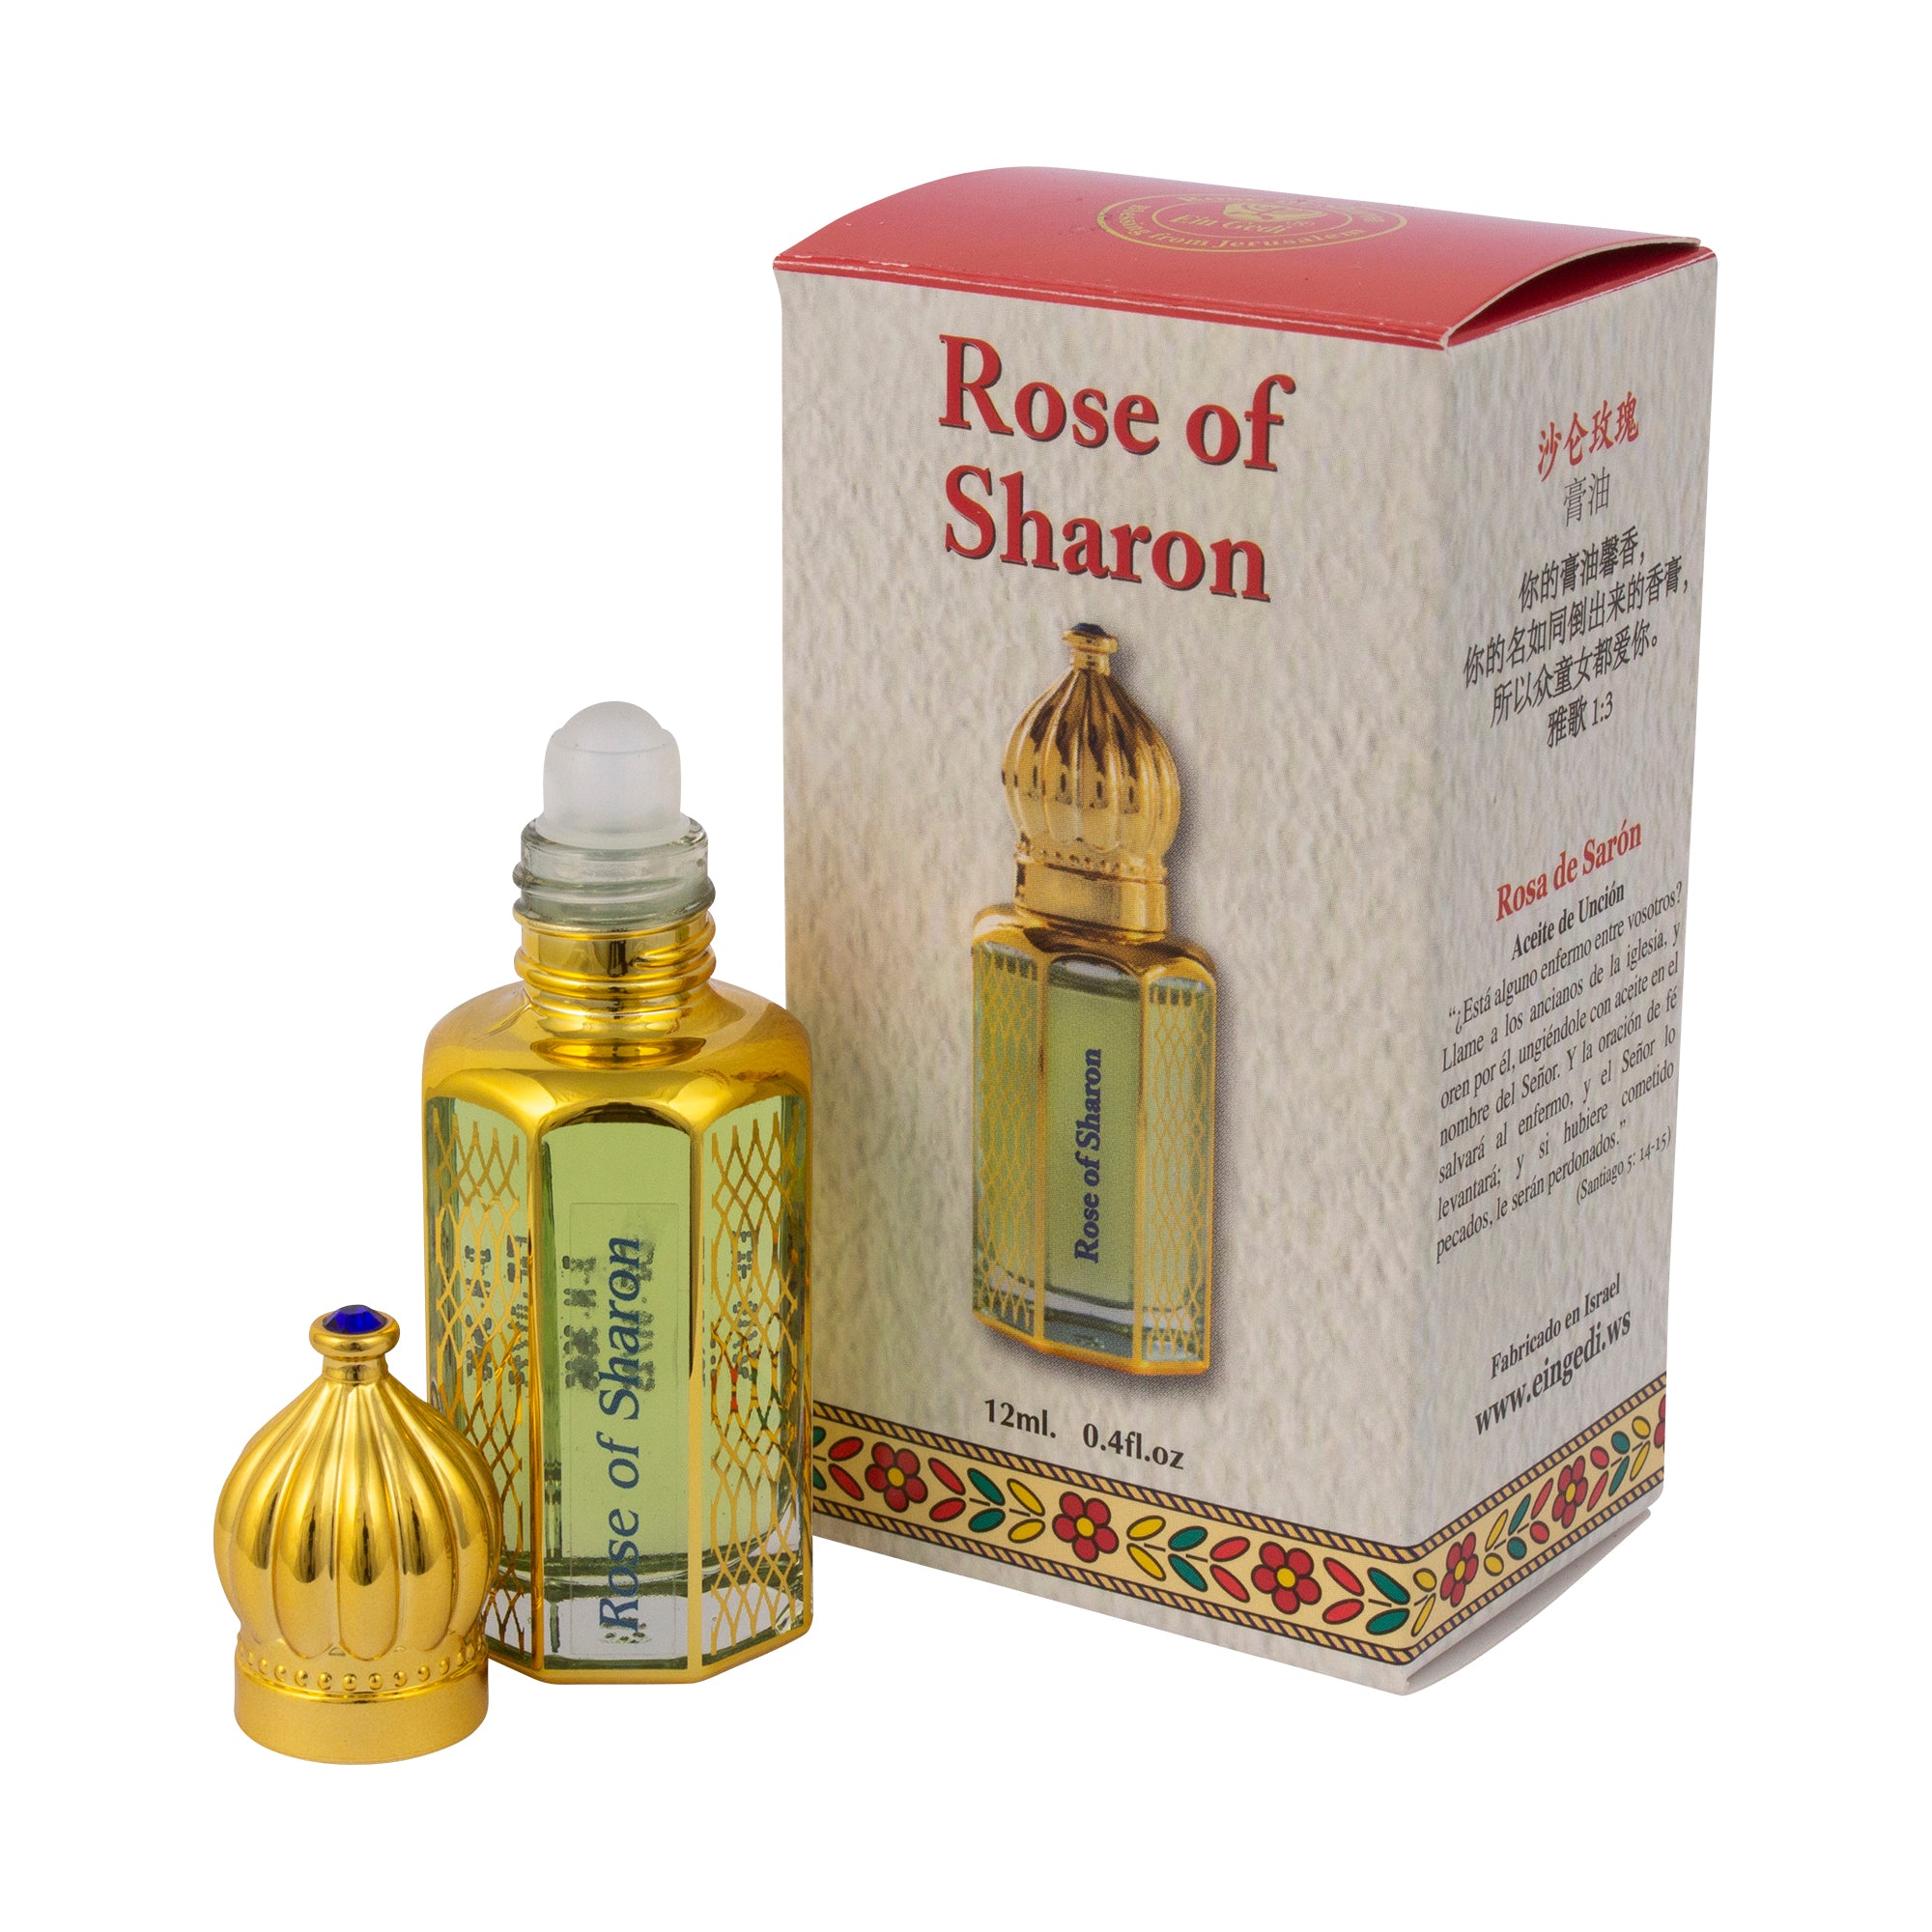 Rose of Sharon Aromatic Prayer Anointing Oil Bible from Holy Land